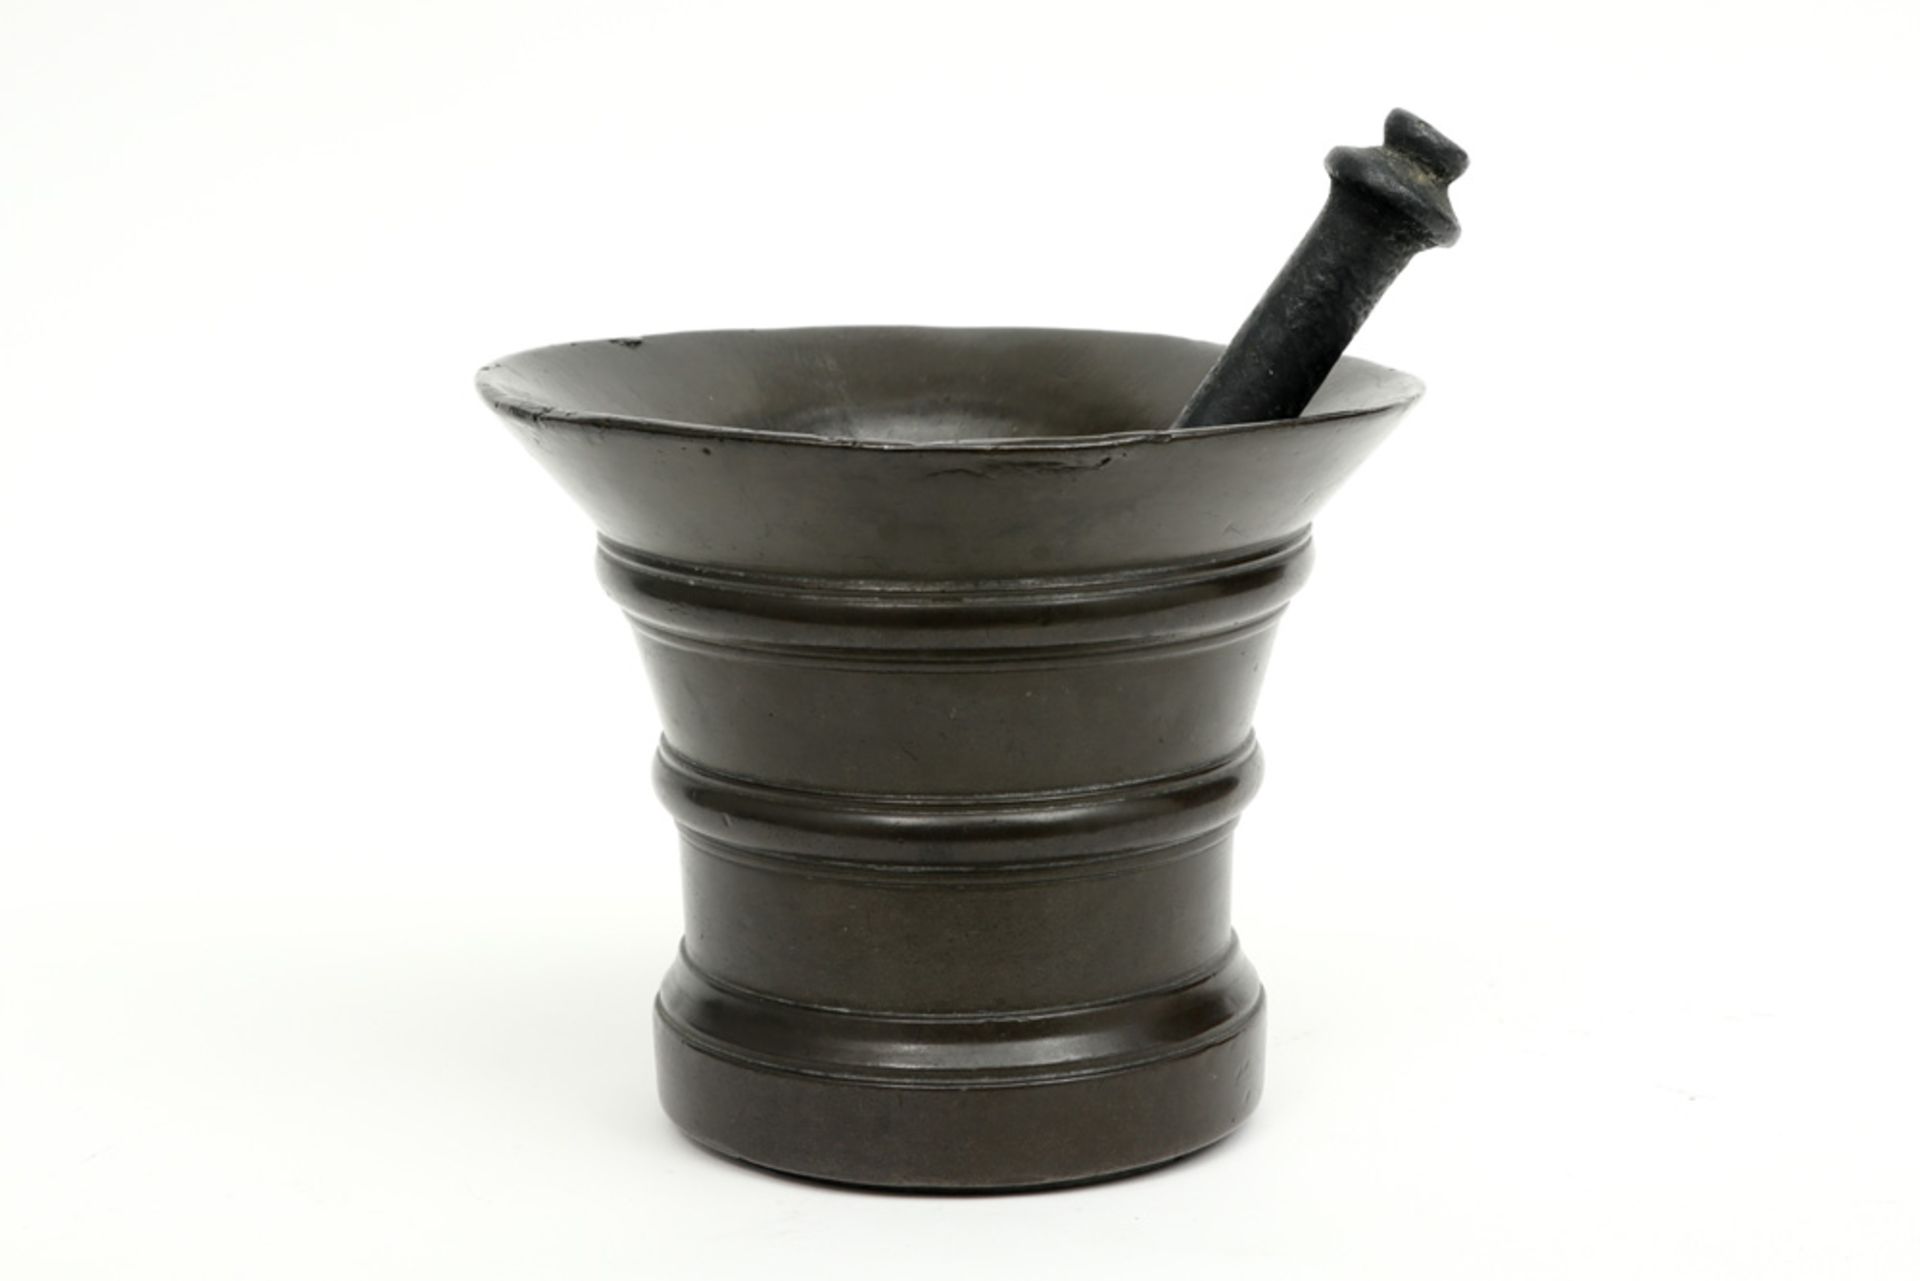 17th/18th Cent. mortar (with its pestle) in bronze with a nice patina